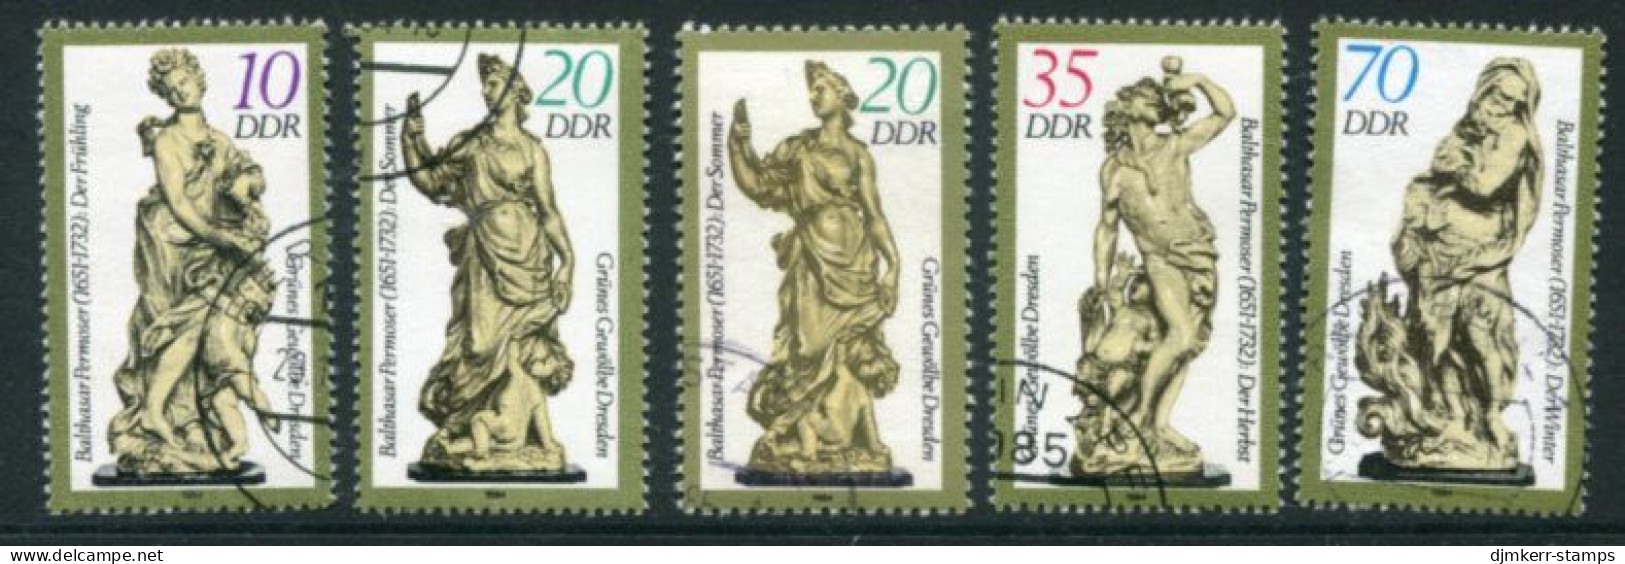 DDR 1984 Statues From The Green Vault With Both 20 Pf. Used.  Michel 2905-08 - Usati